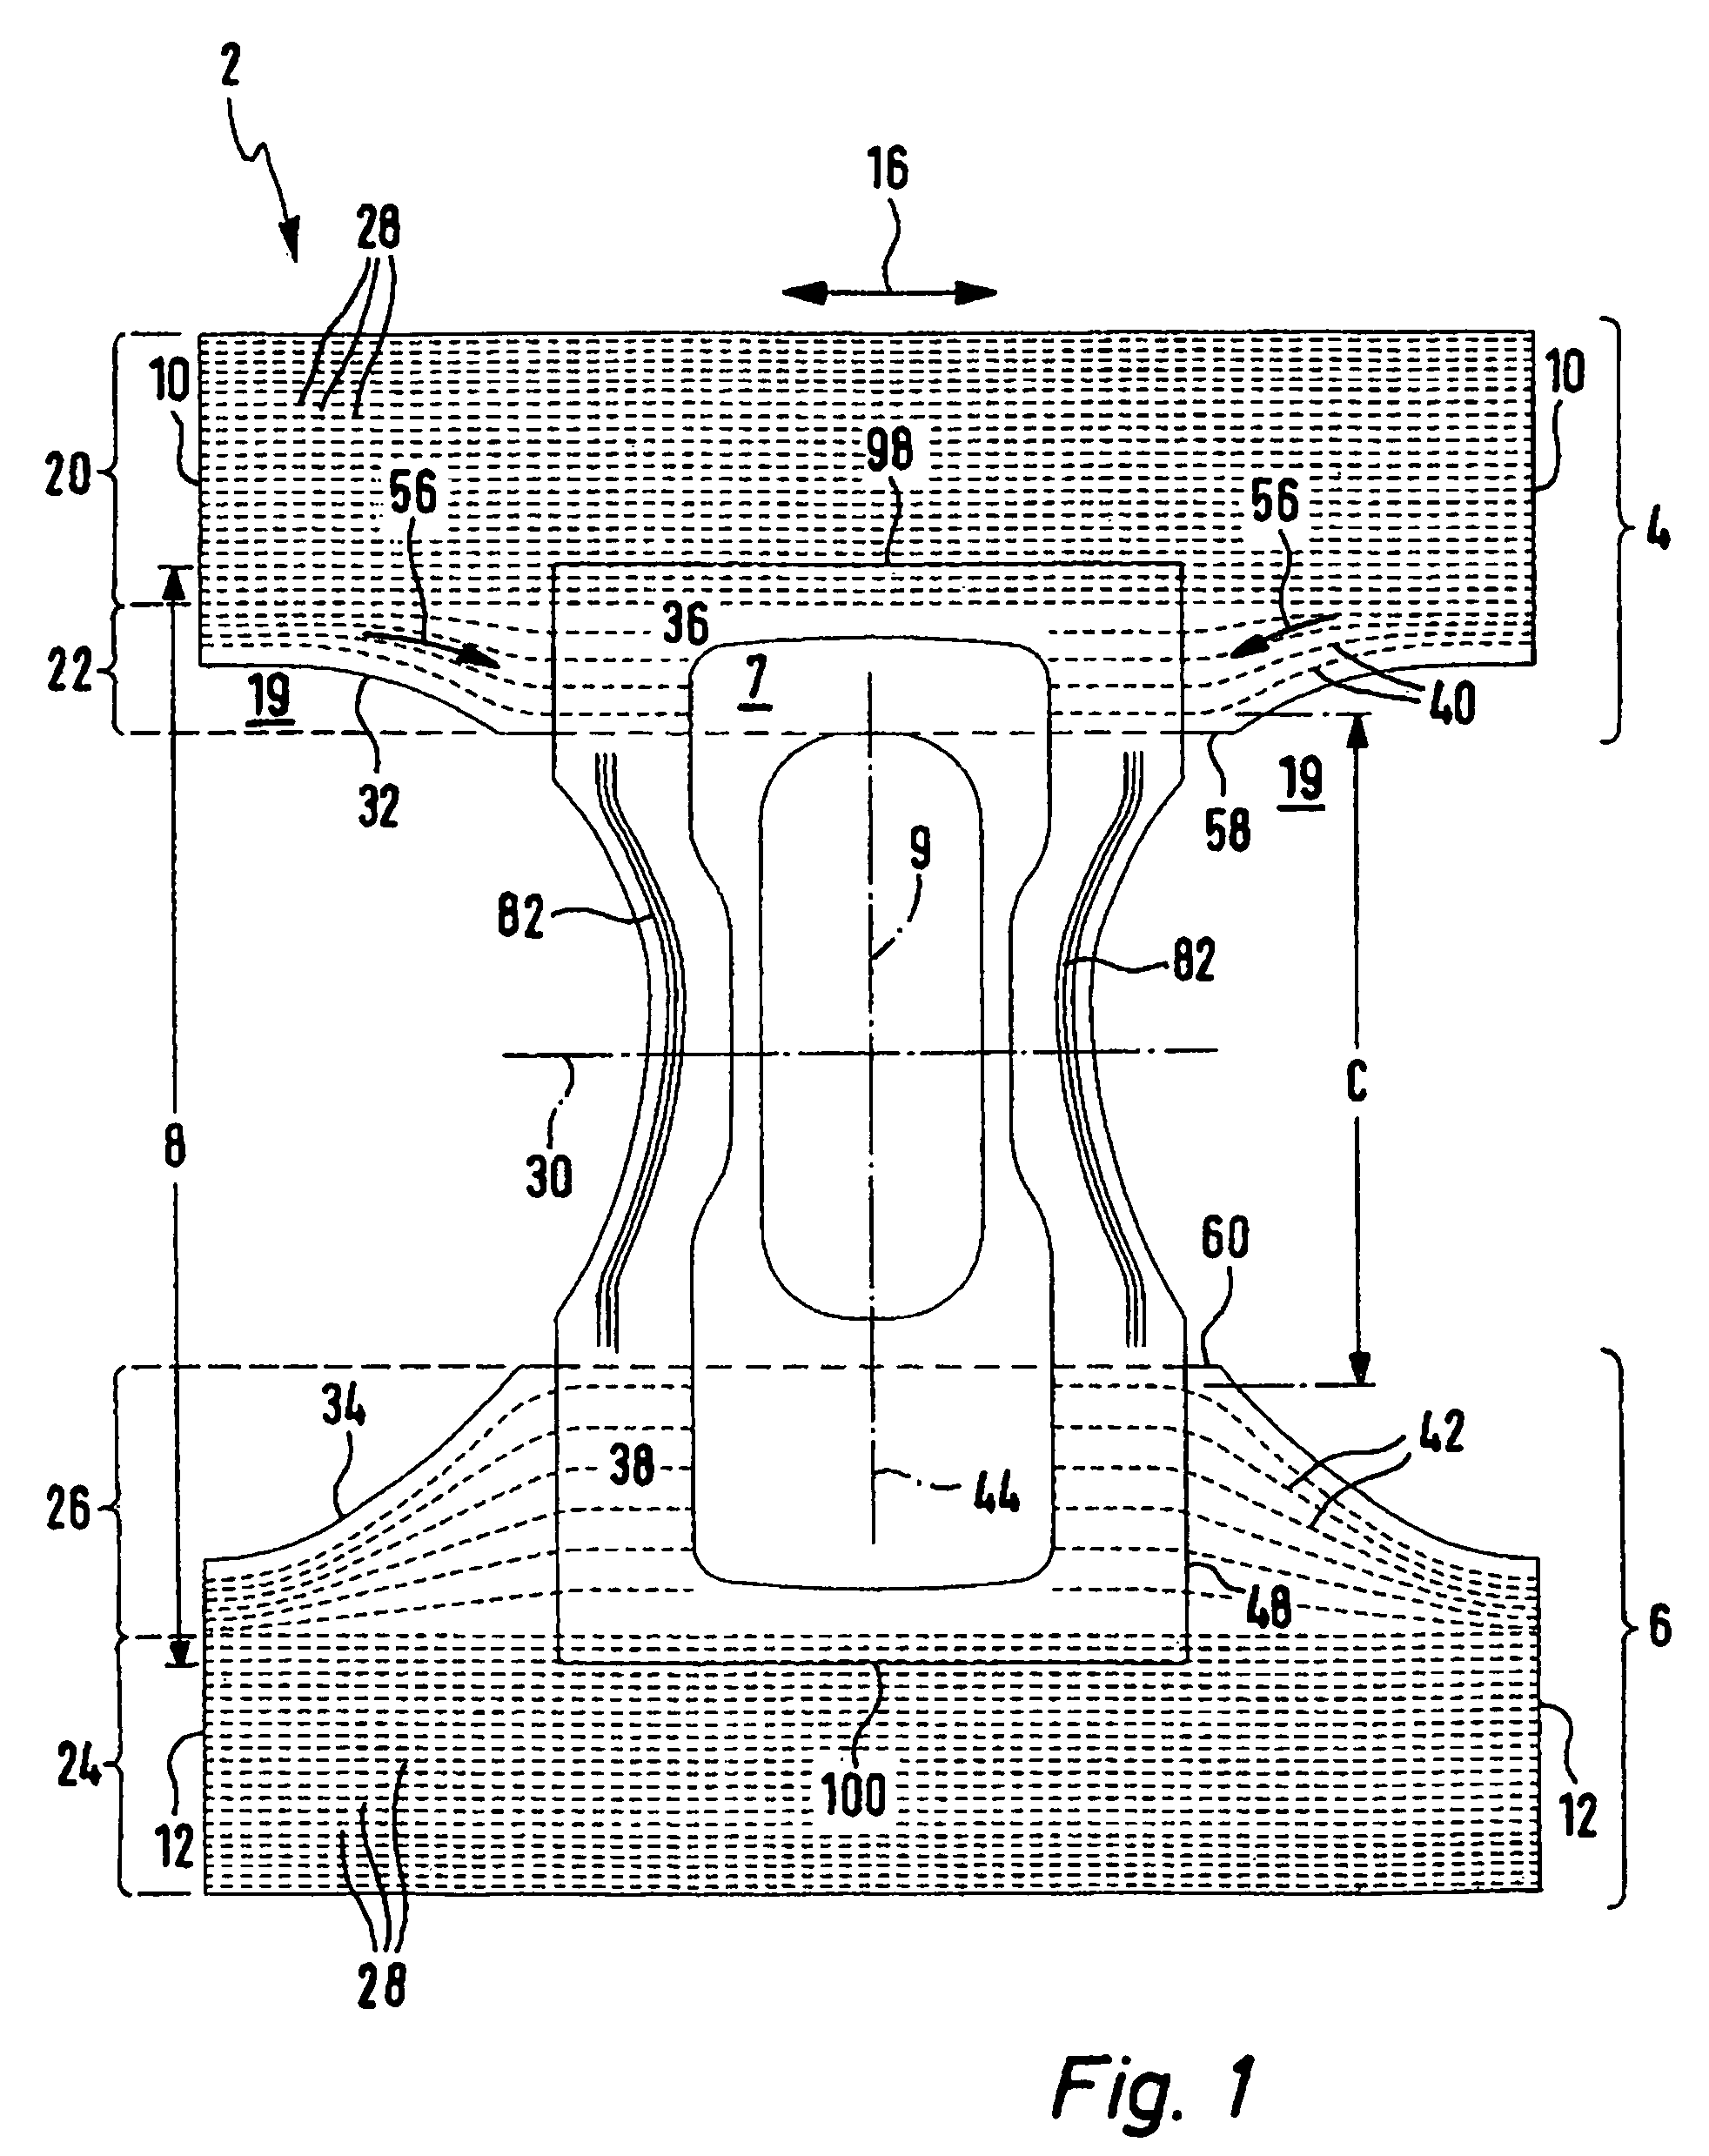 Method of producing incontinence articles in the form of pants